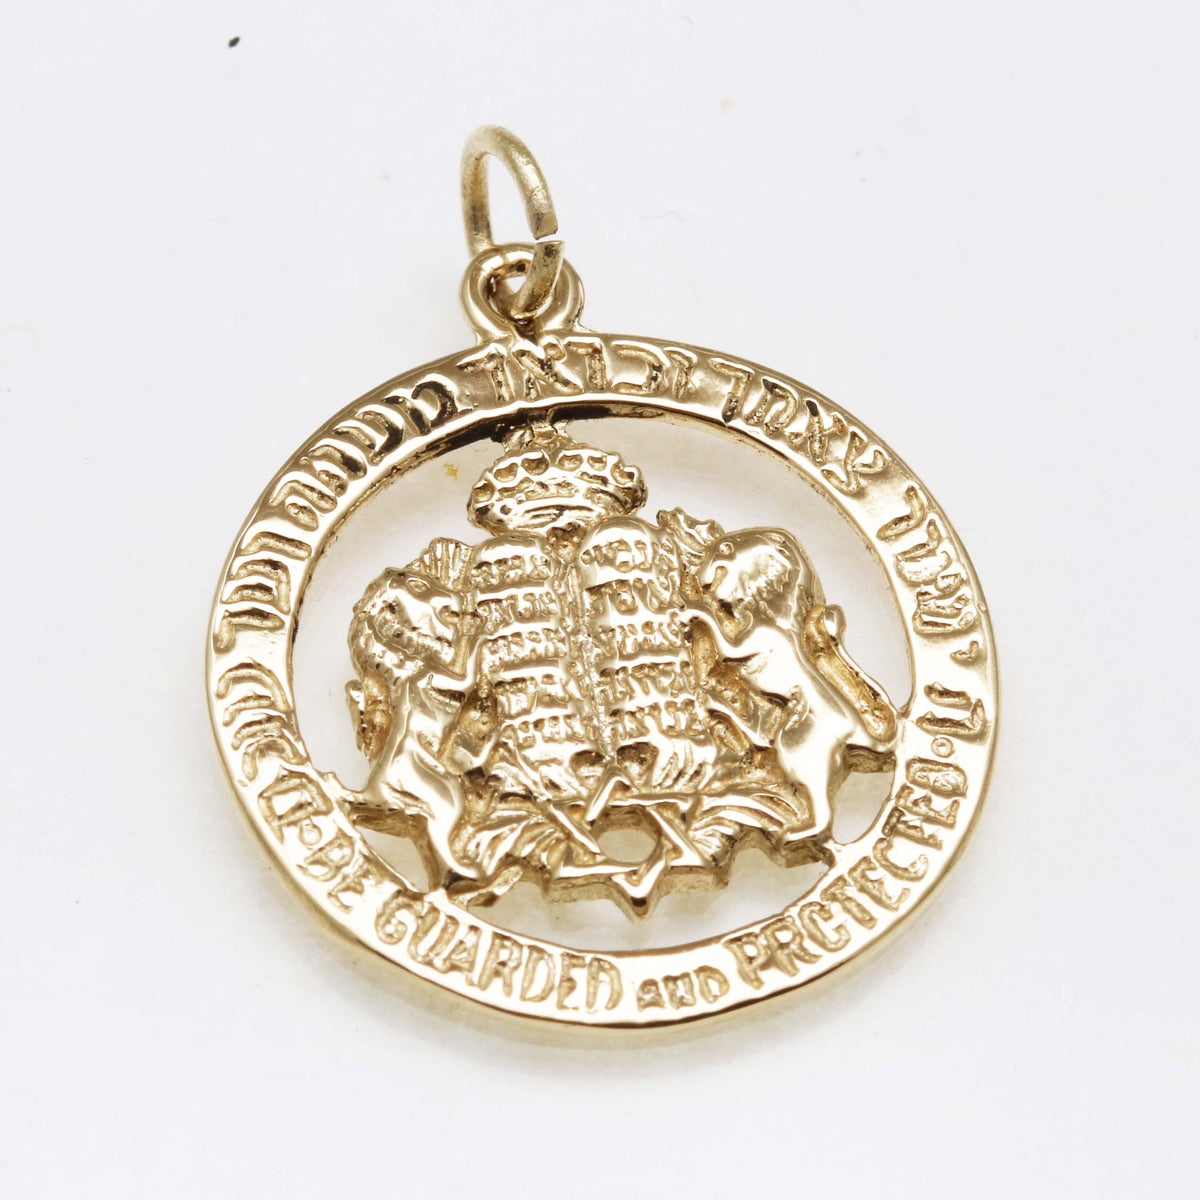 14k Yellow Gold Lion Pendant Be Guarded and Protected - JewelryJudaica